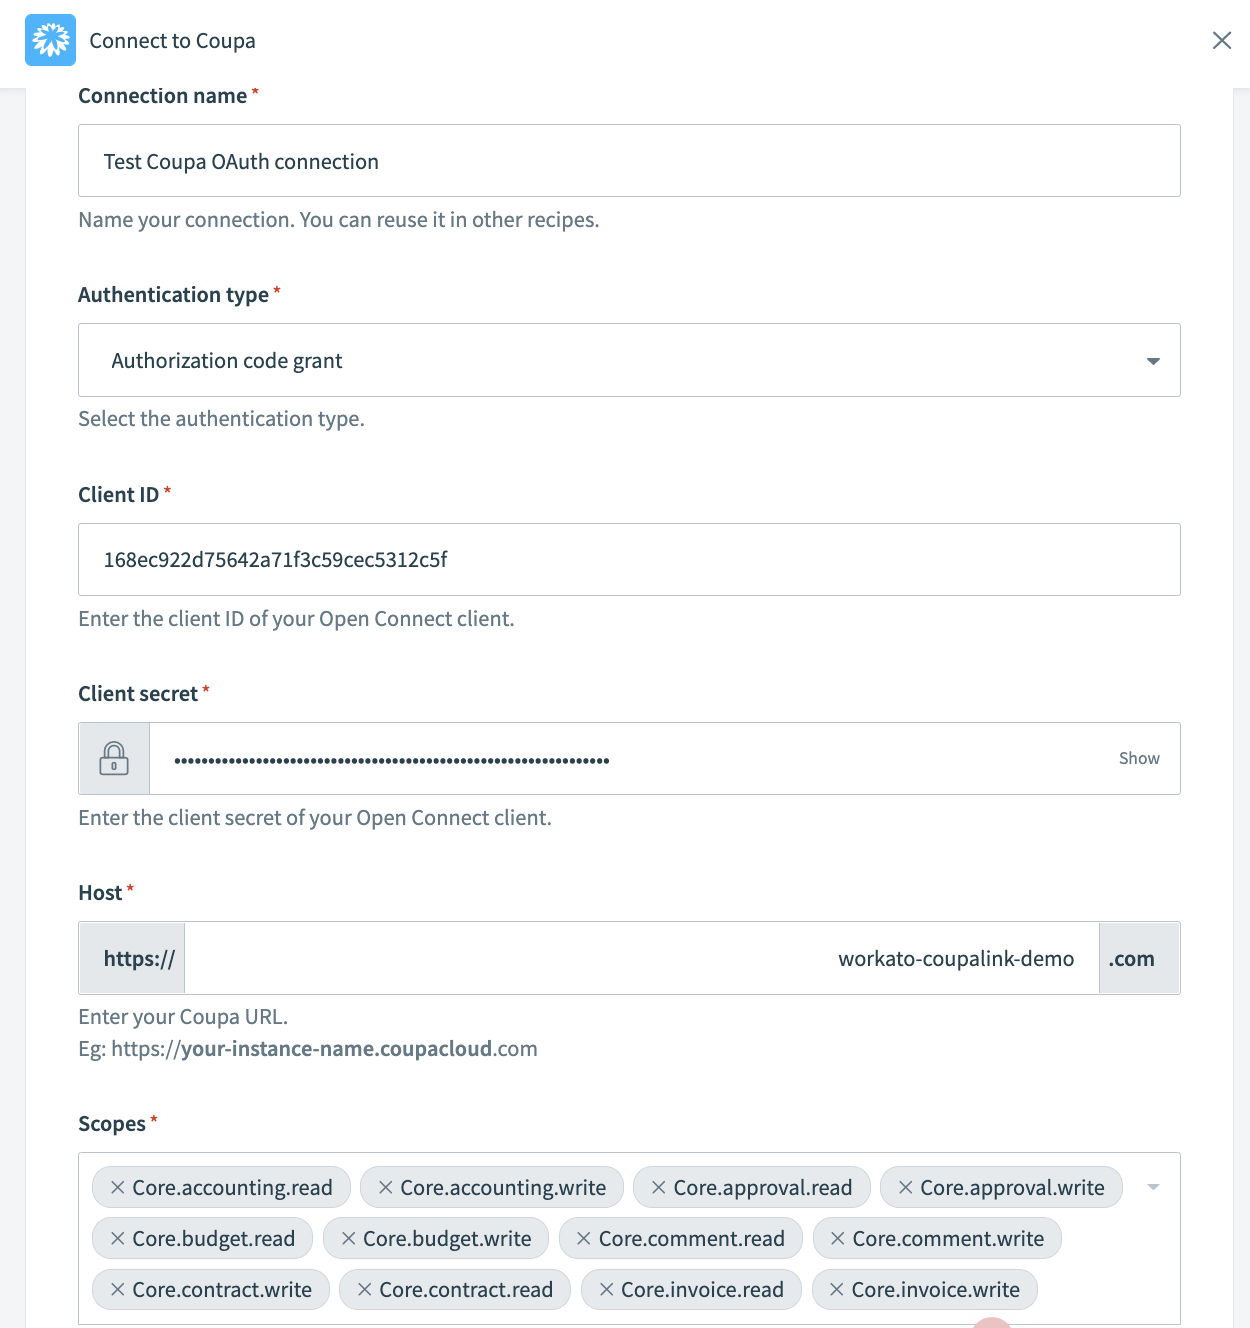 Coupa connector connection settings for OAuth 2.0 connection